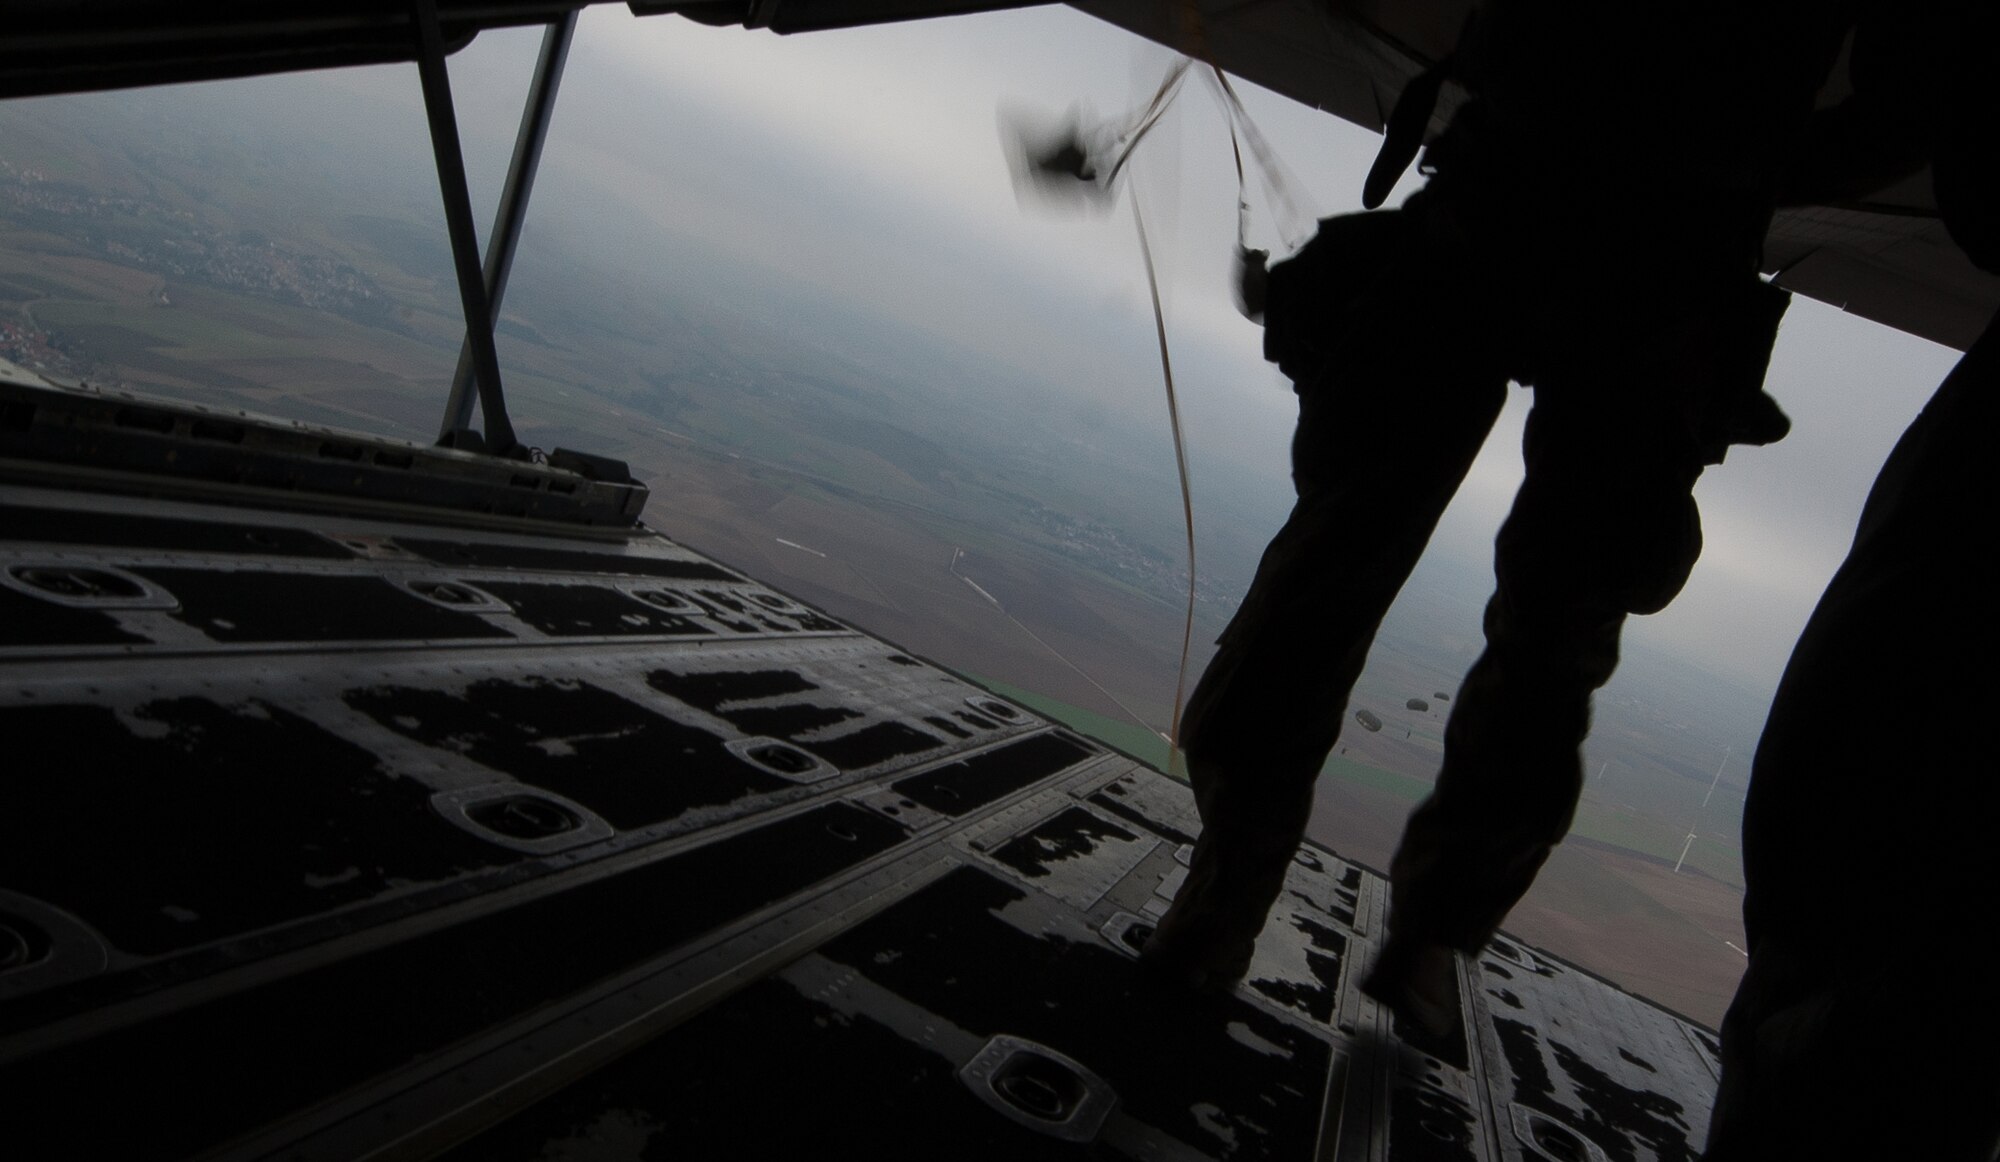 NATO allied nation paratroopers jump out the back of a C-130J Super Hercules during an International Jump Week exercise over Germany Dec. 1, 2016. As part of the exercise, Ramstein Air Base assisted by providing aircraft for the paratroopers to jump from. (U.S. Air Force photo by Airman 1st Class Lane T. Plummer)